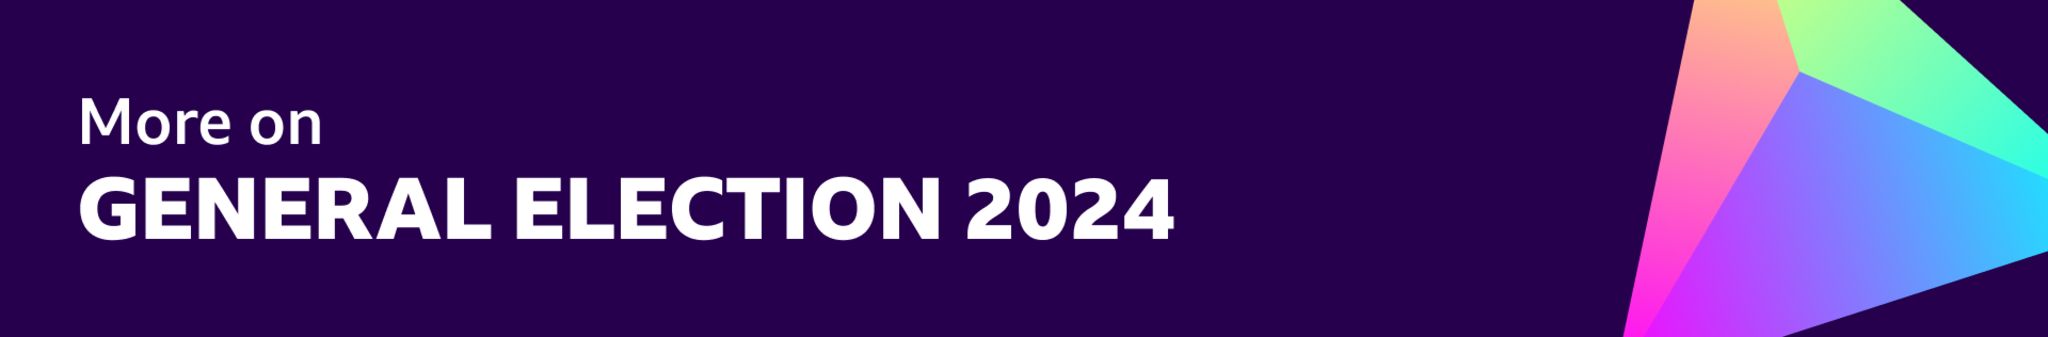 General Election 2024 graphic